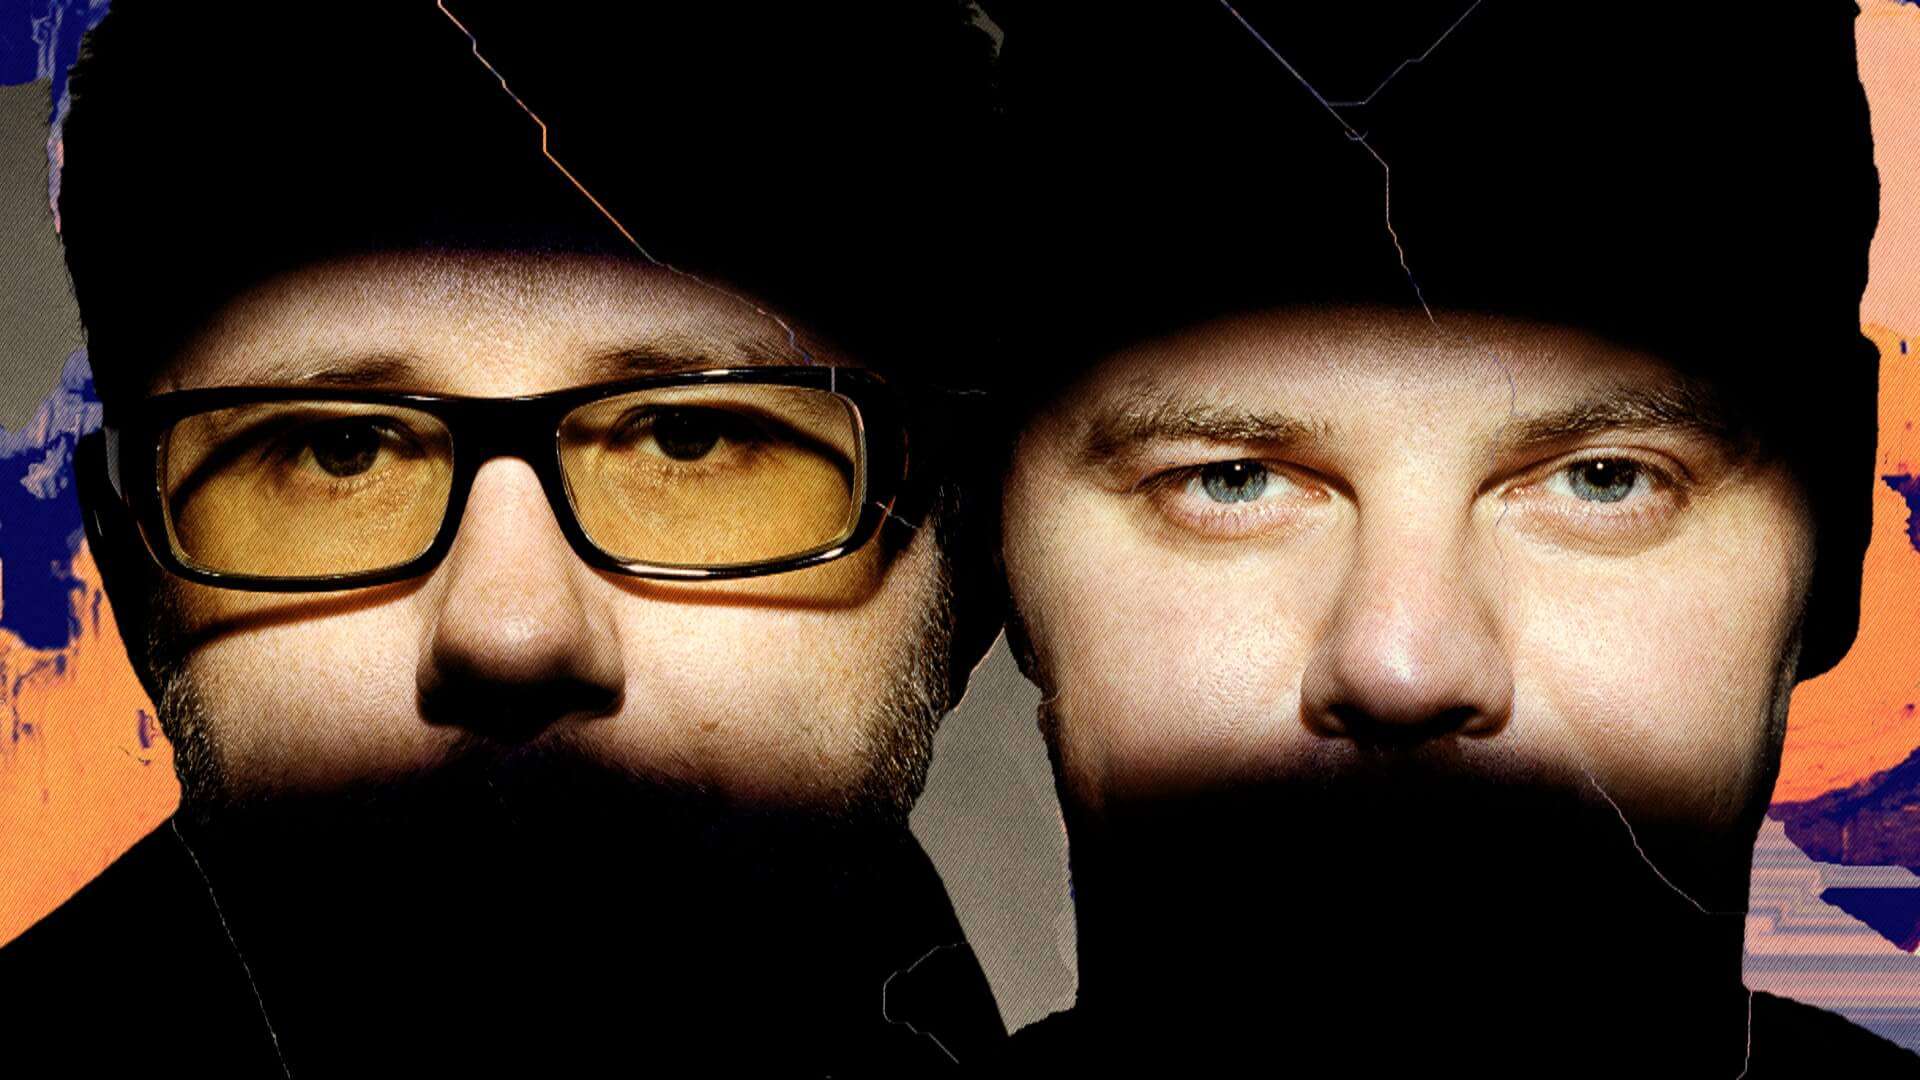 Chemical Brothers announce new album this fall via billboard